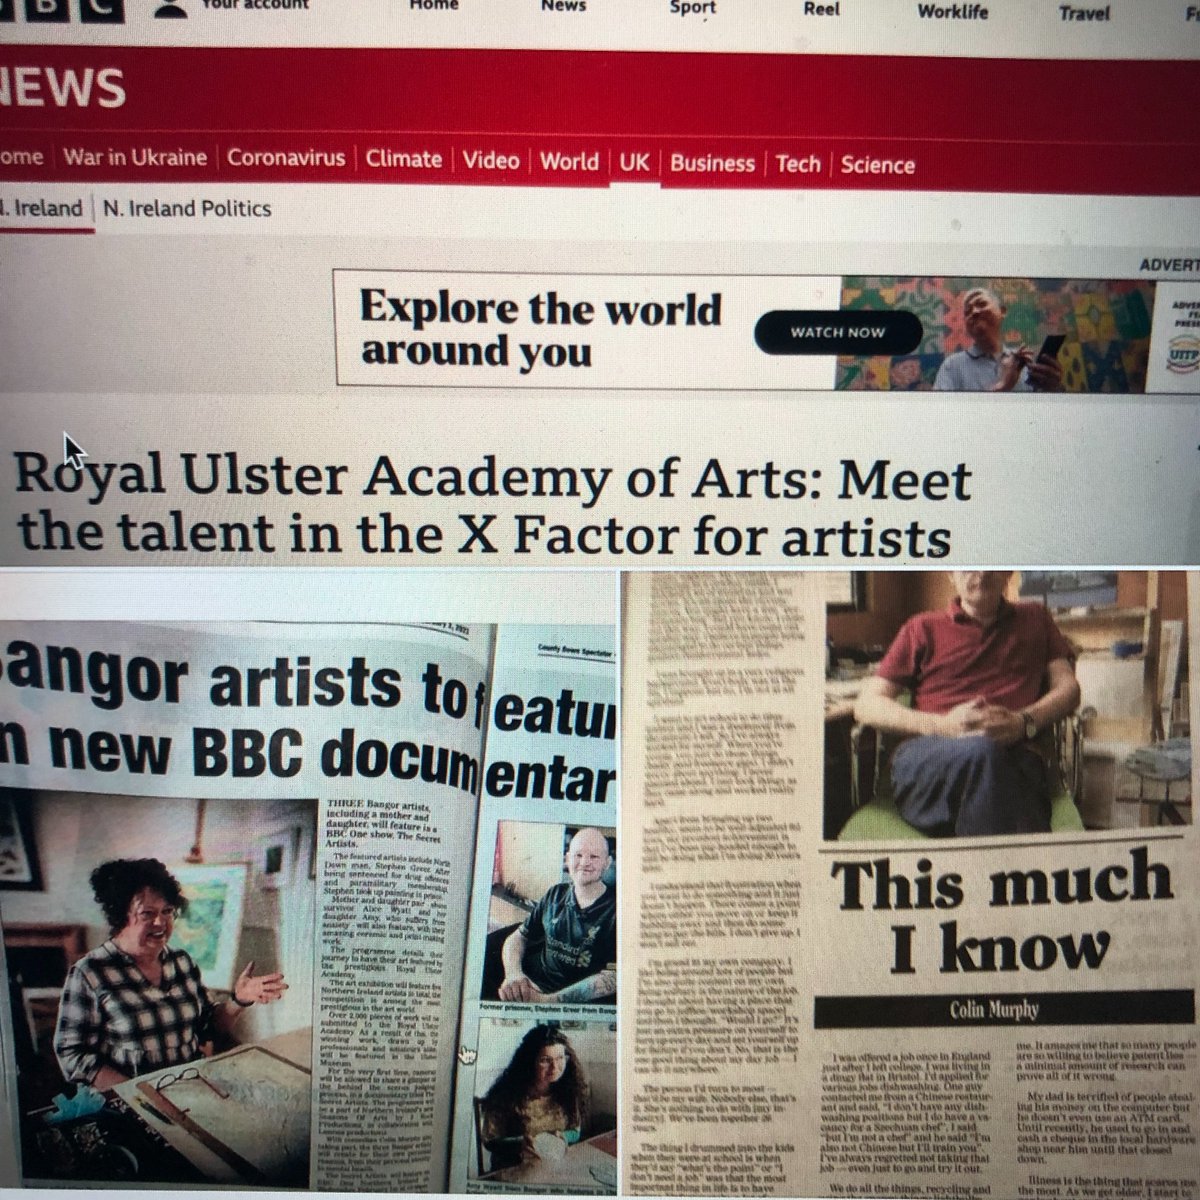 It’s all happening, baby! Great buzz for #SecretArtists thanks for all the coverage @BBCNewsNI  @irishexaminer  CountyDownReporter let’s hope everyone enjoys the main event now. It airs this Wednesday (8th Feb) on @bbcone at 10.40pm, also on iPlayer